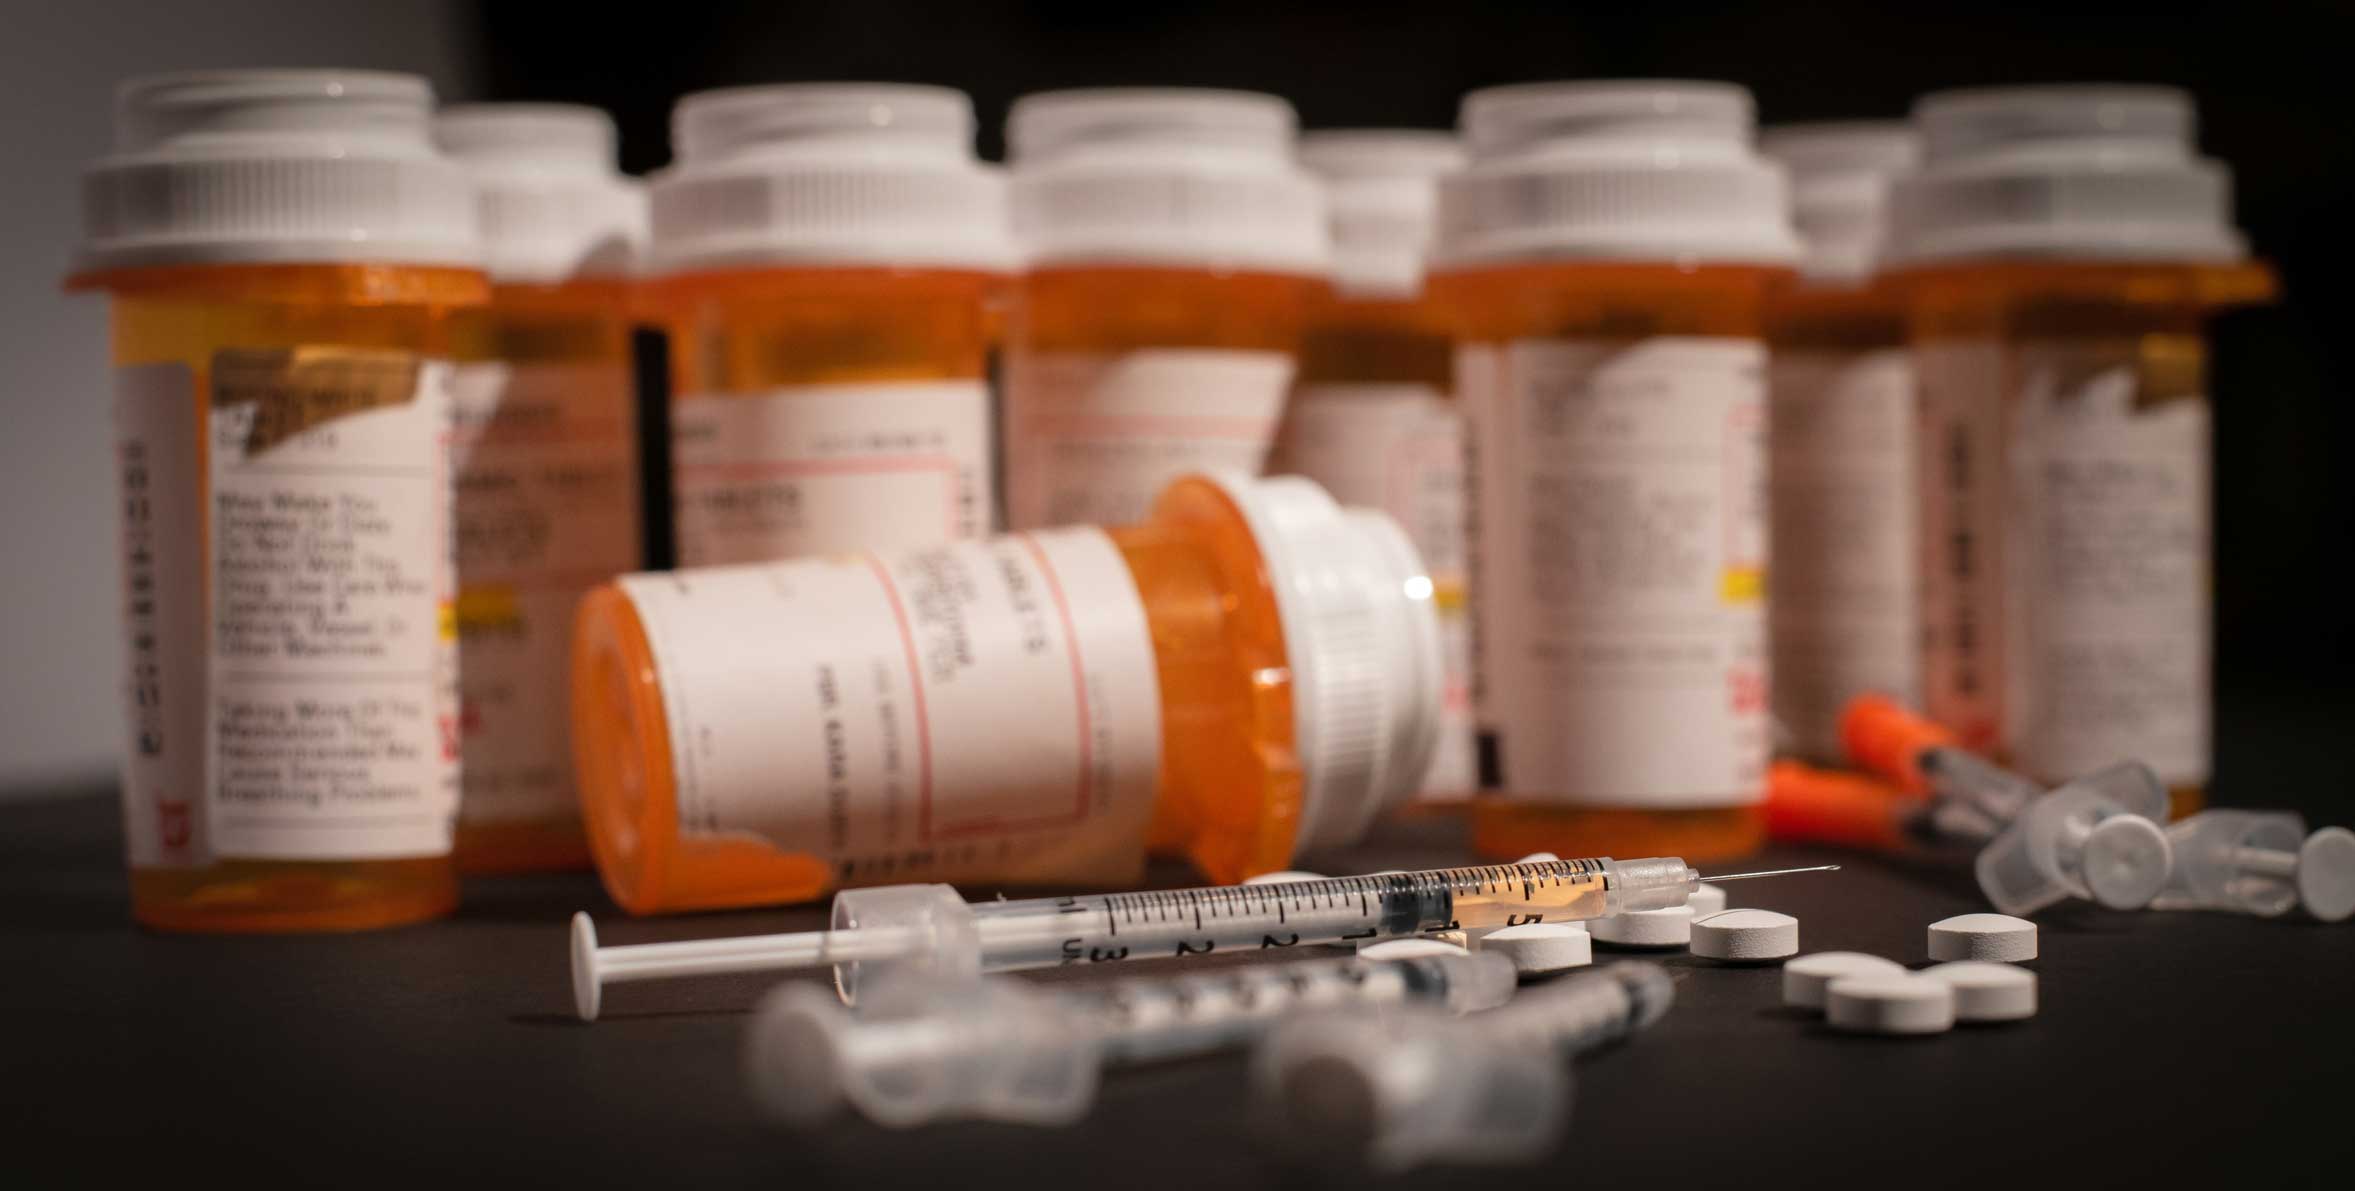 Picture of opioid pill bottle and syringe